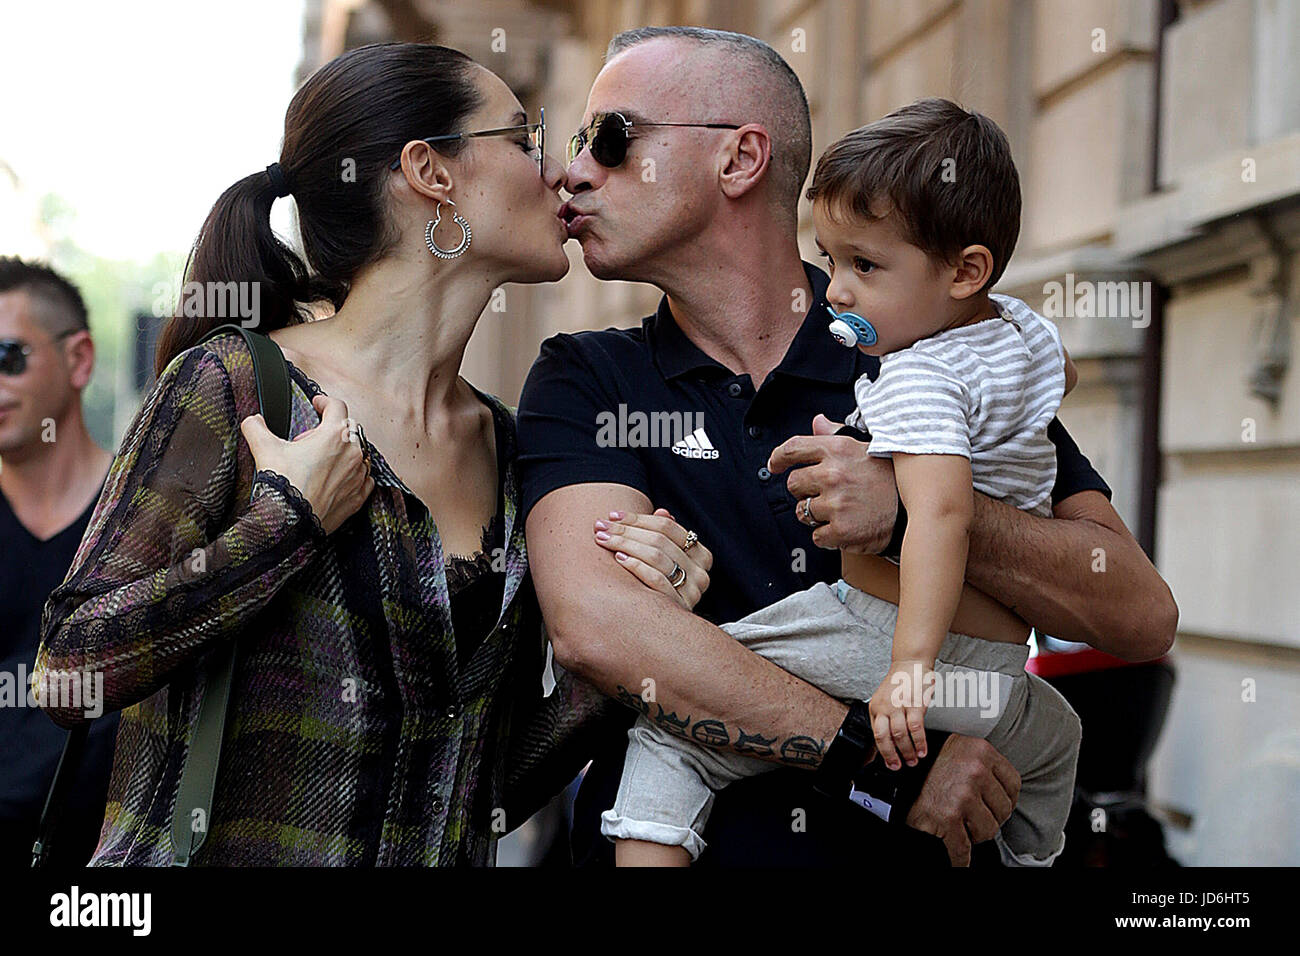 Marica Pellegrinelli with her husband Eros Ramazzotti and their son Gabrio Tullio in Milan  Featuring: Marica Pellegrinelli, Eros Ramazzotti, Gabrio Tullio Where: Milan, Italy When: 17 May 2017 Credit: IPA/WENN.com  **Only available for publication in UK, USA, Germany, Austria, Switzerland** Stock Photo